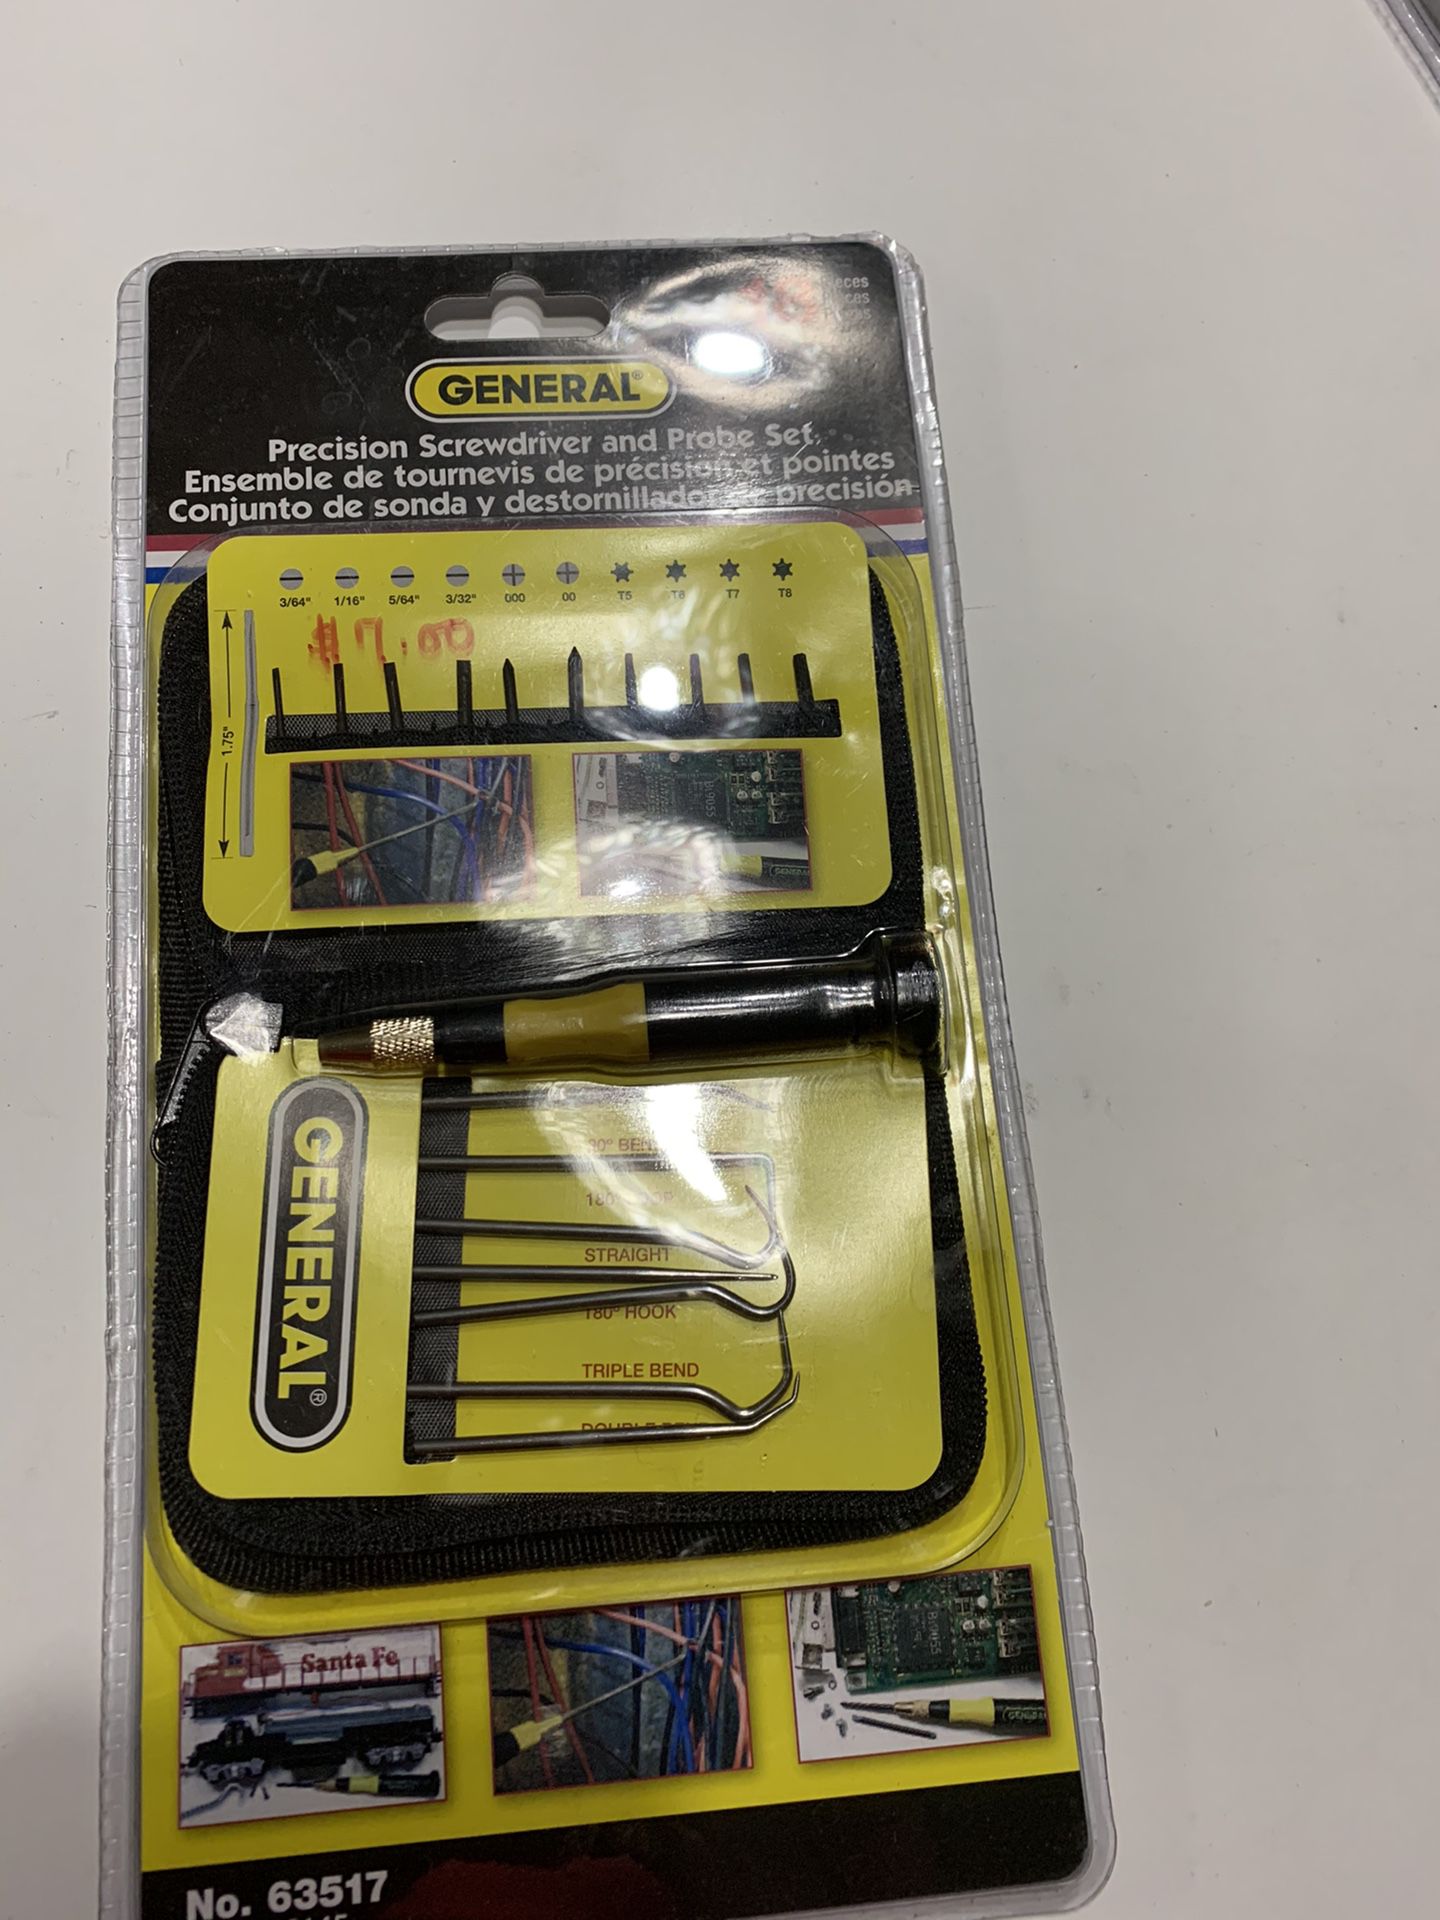 2 new general 18 piece precision screwdriver and probe set. $7 each.